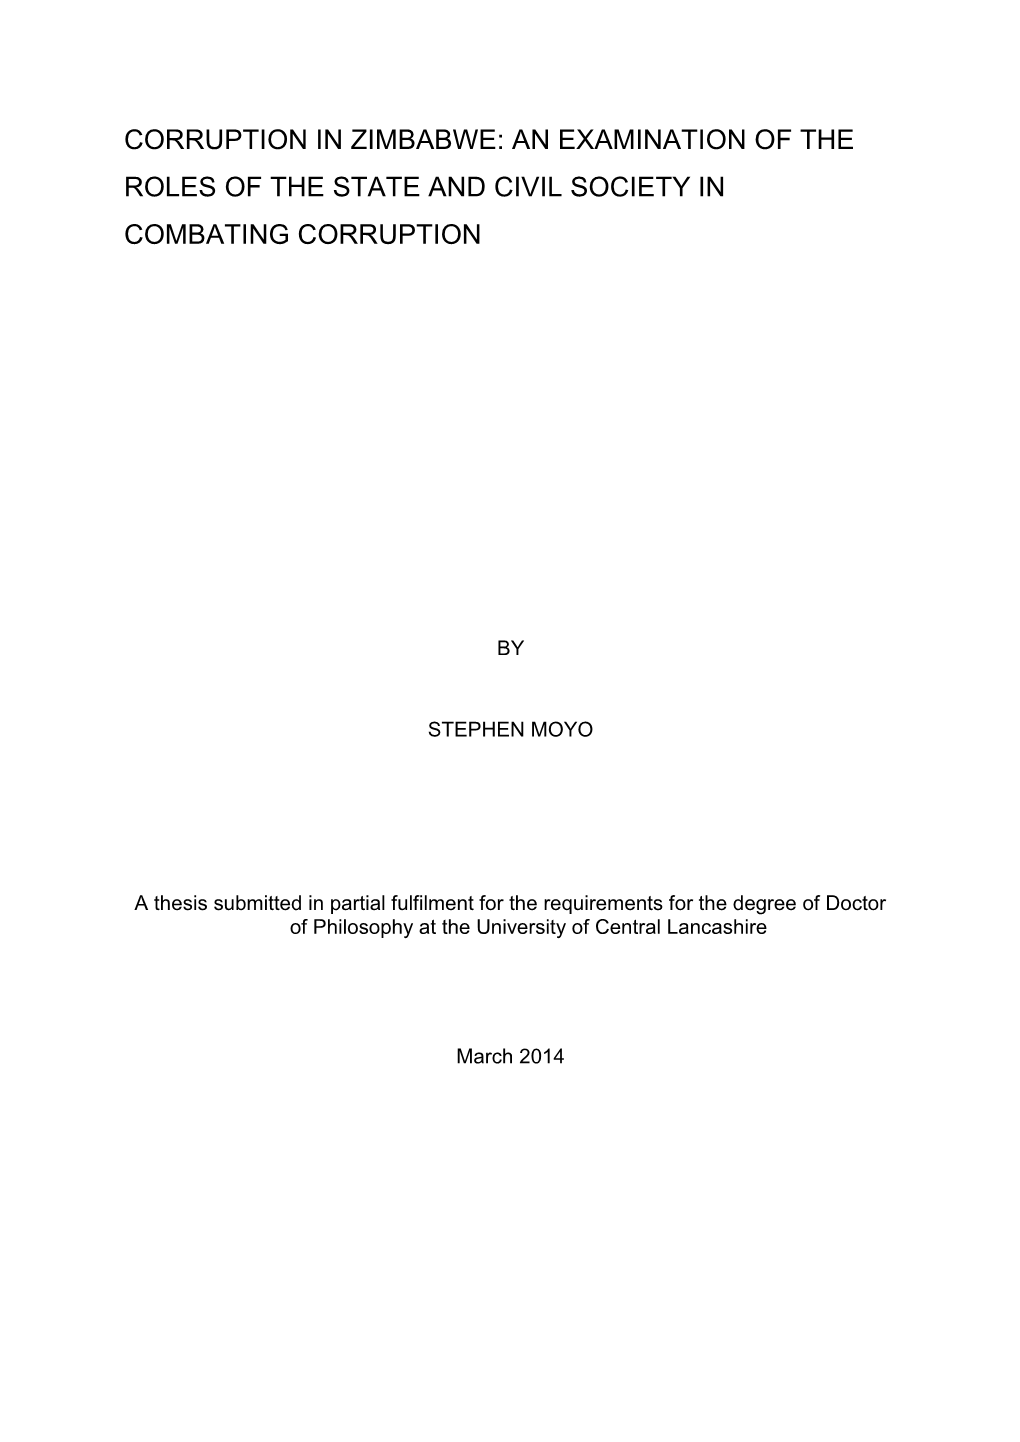 Corruption in Zimbabwe: an Examination of the Roles of the State and Civil Society in Combating Corruption